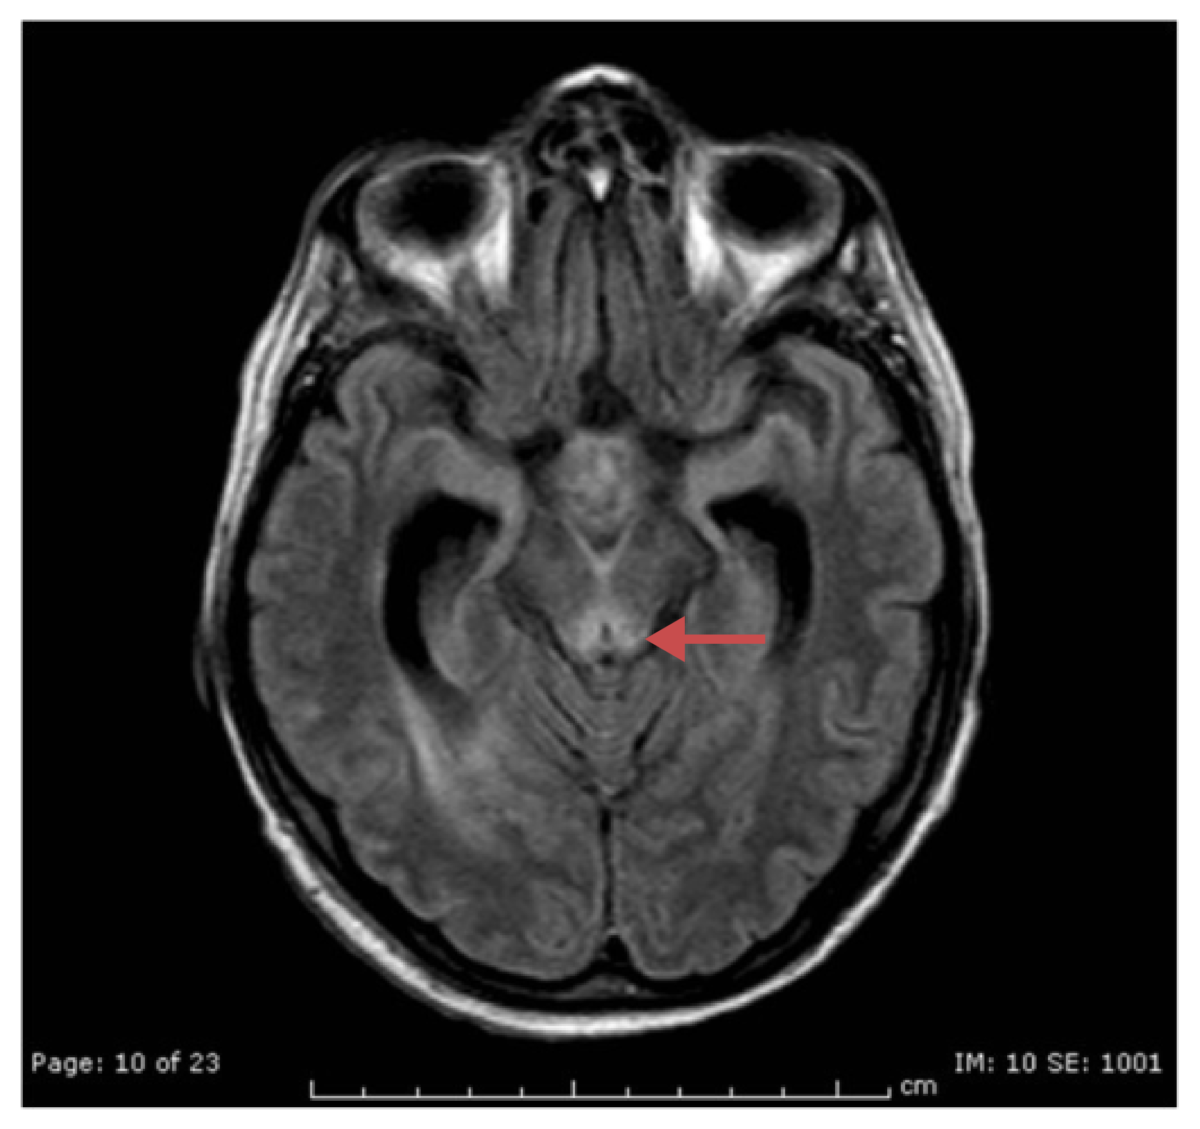 A patient with wernicke encephalopathy showing hyperintensity of the periaqueductal gray substancea patient with wernicke encephalopathy showing hyperintensity of the periaqueductal gray substance